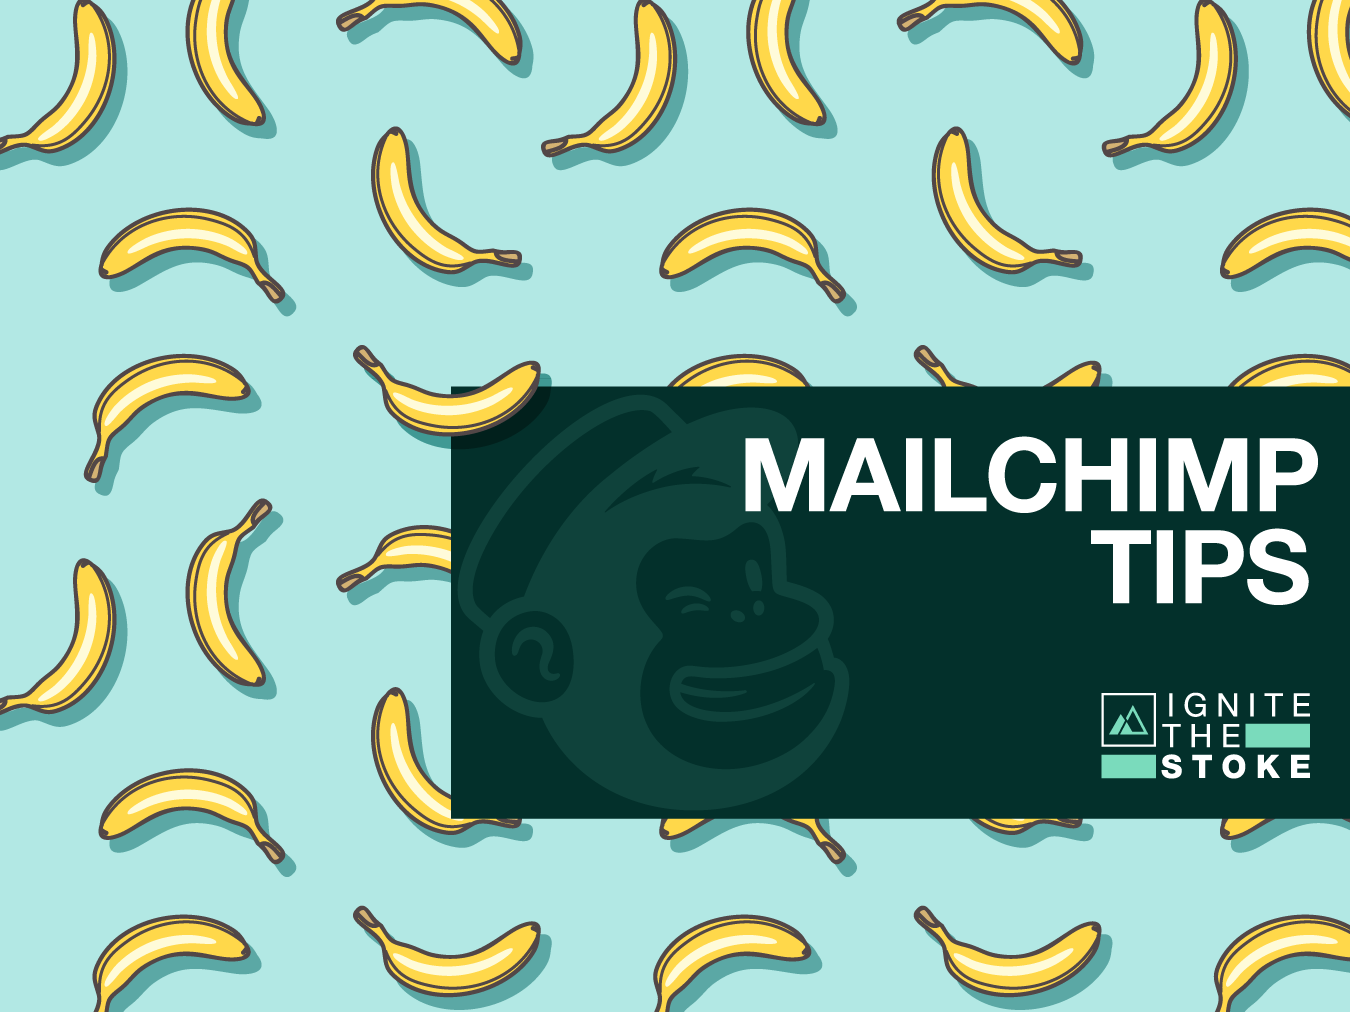 Mailchimp Tips from Ignite The Stoke.